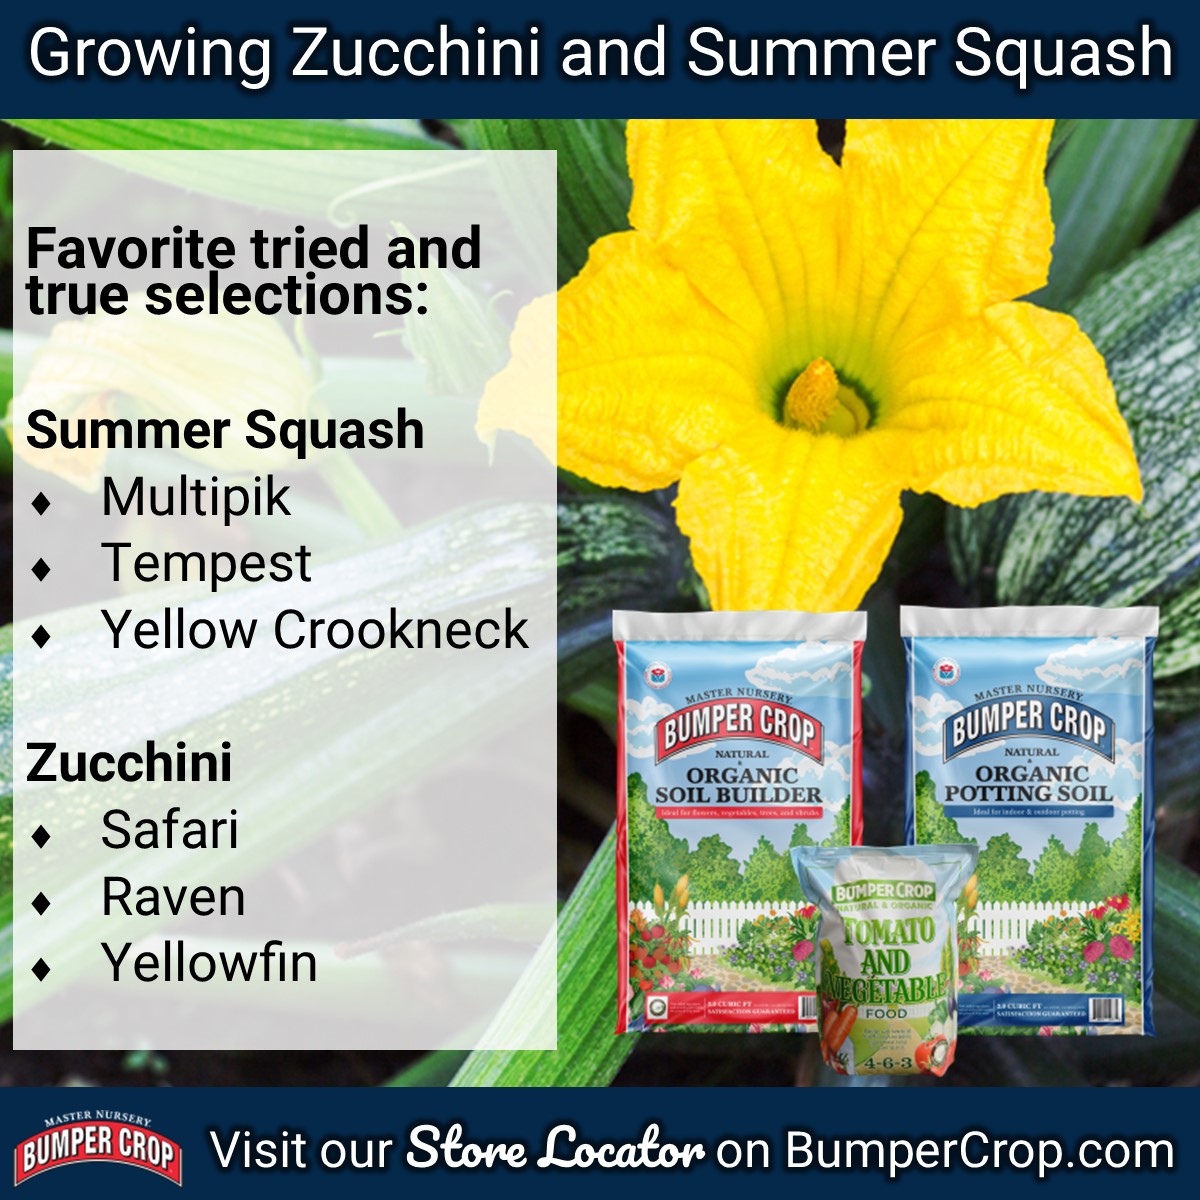 Plant zucchini and summer squash into the ground, in a container, or in a raised bed. See our article for planting instructions: bumpercrop.com/growing-zucchi…  #BumperCrop #SoilBuilder #PottingSoil #Zucchini #SummerSquash